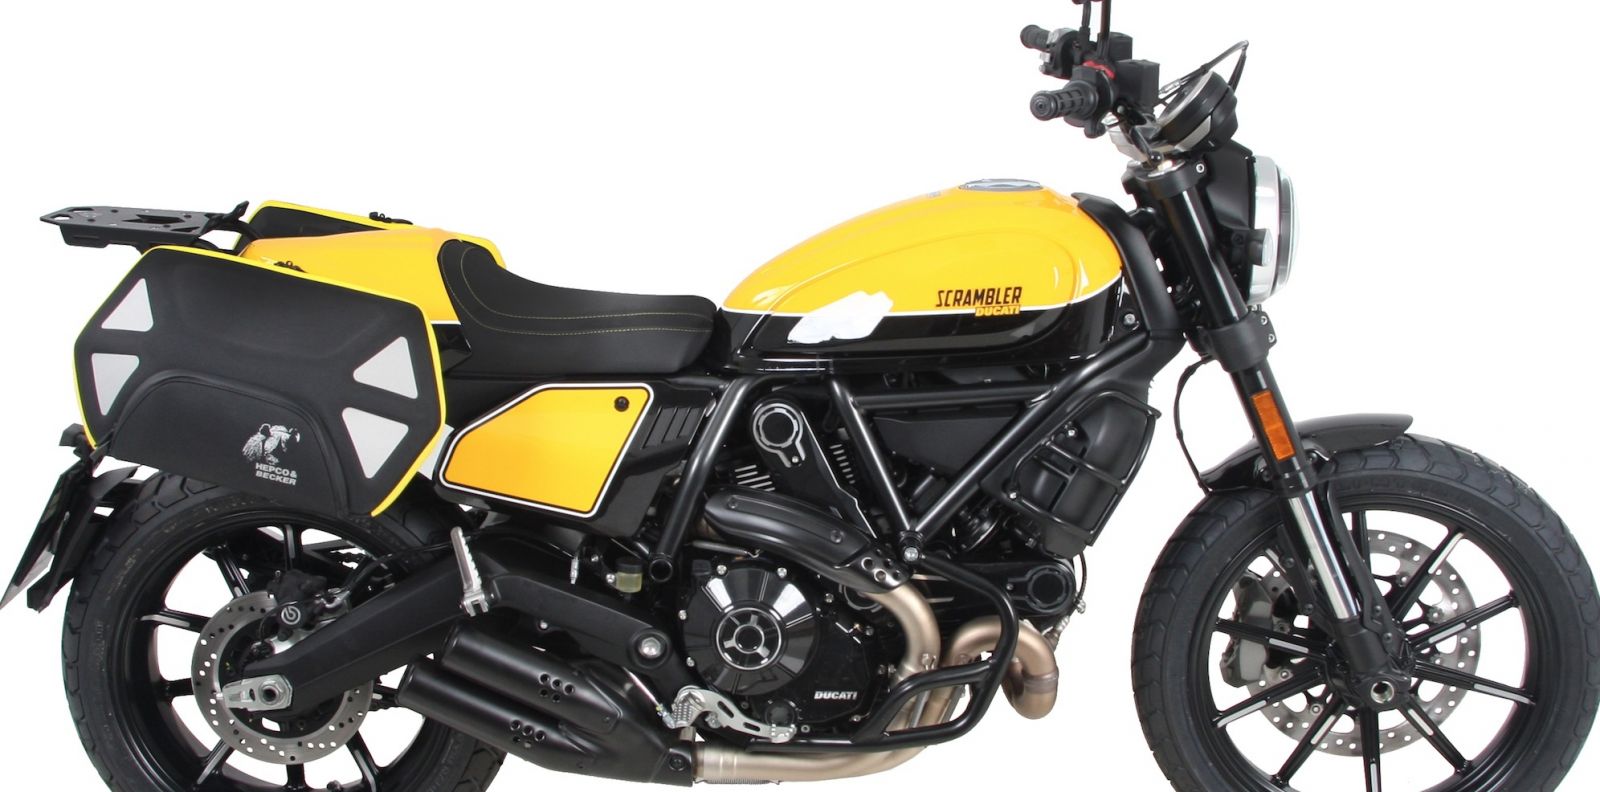 Ducati Scrambler 2019 800 fitted with Hepco and Becker accessories by Motorcycle Adventure Products